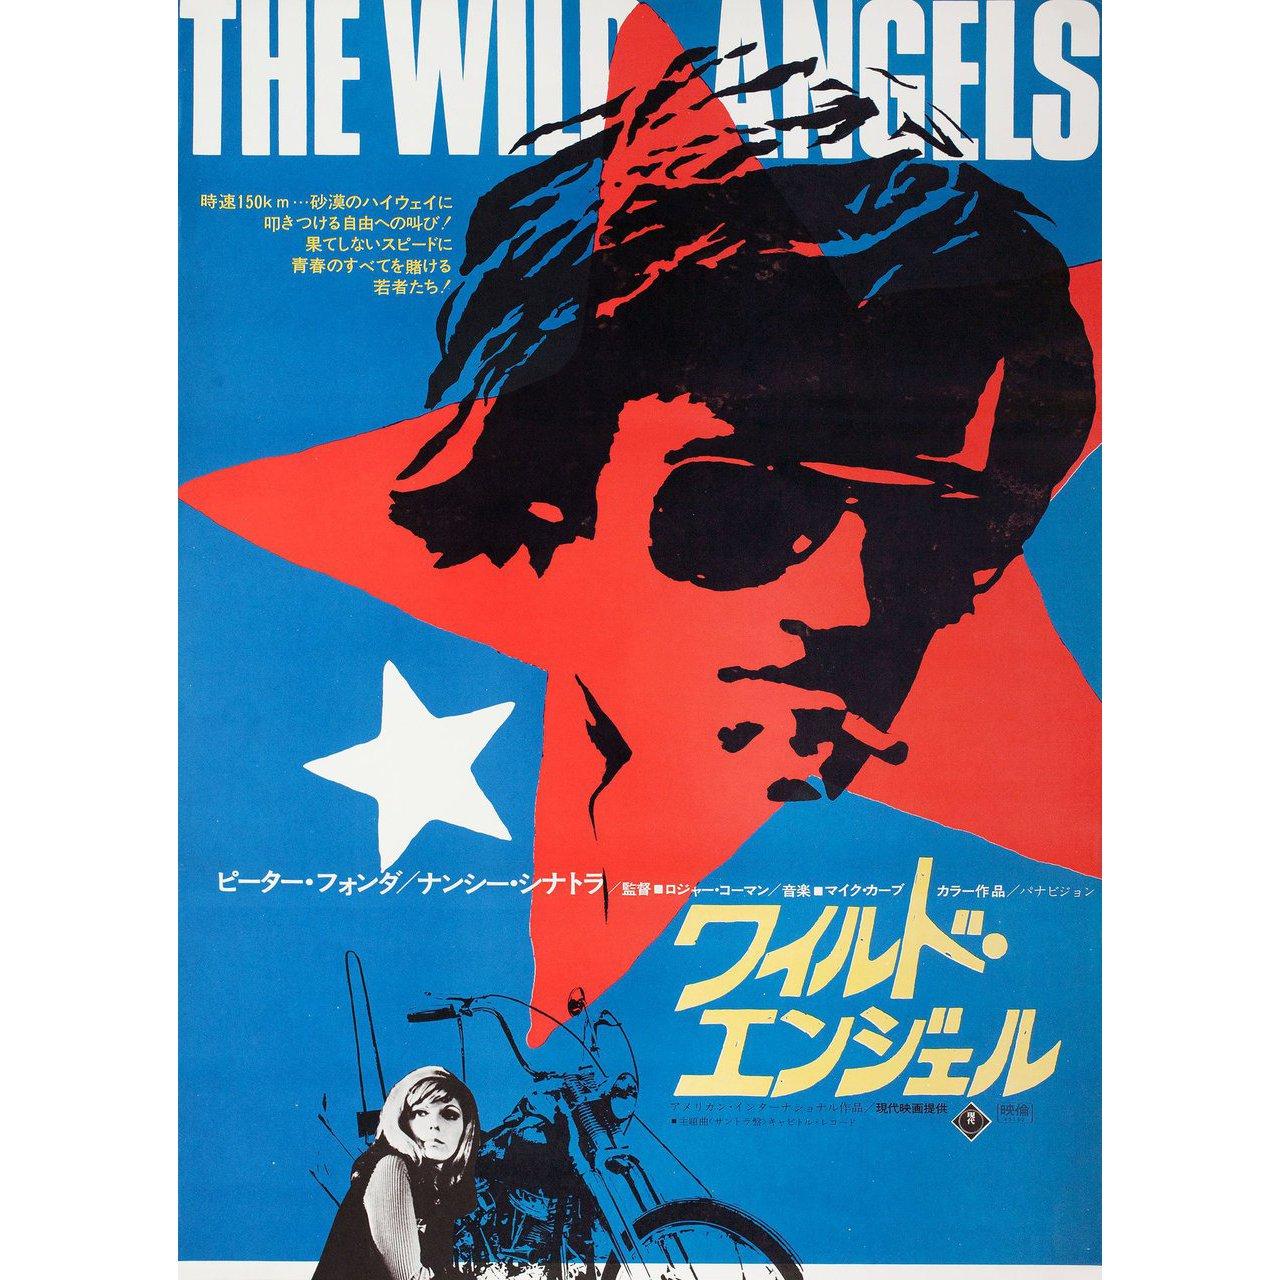 Original 1970 Japanese B2 poster for the 1966 film The Wild Angels directed by Roger Corman with Peter Fonda / Nancy Sinatra / Bruce Dern / Diane Ladd. Very good-fine condition, rolled. Please note: the size is stated in inches and the actual size